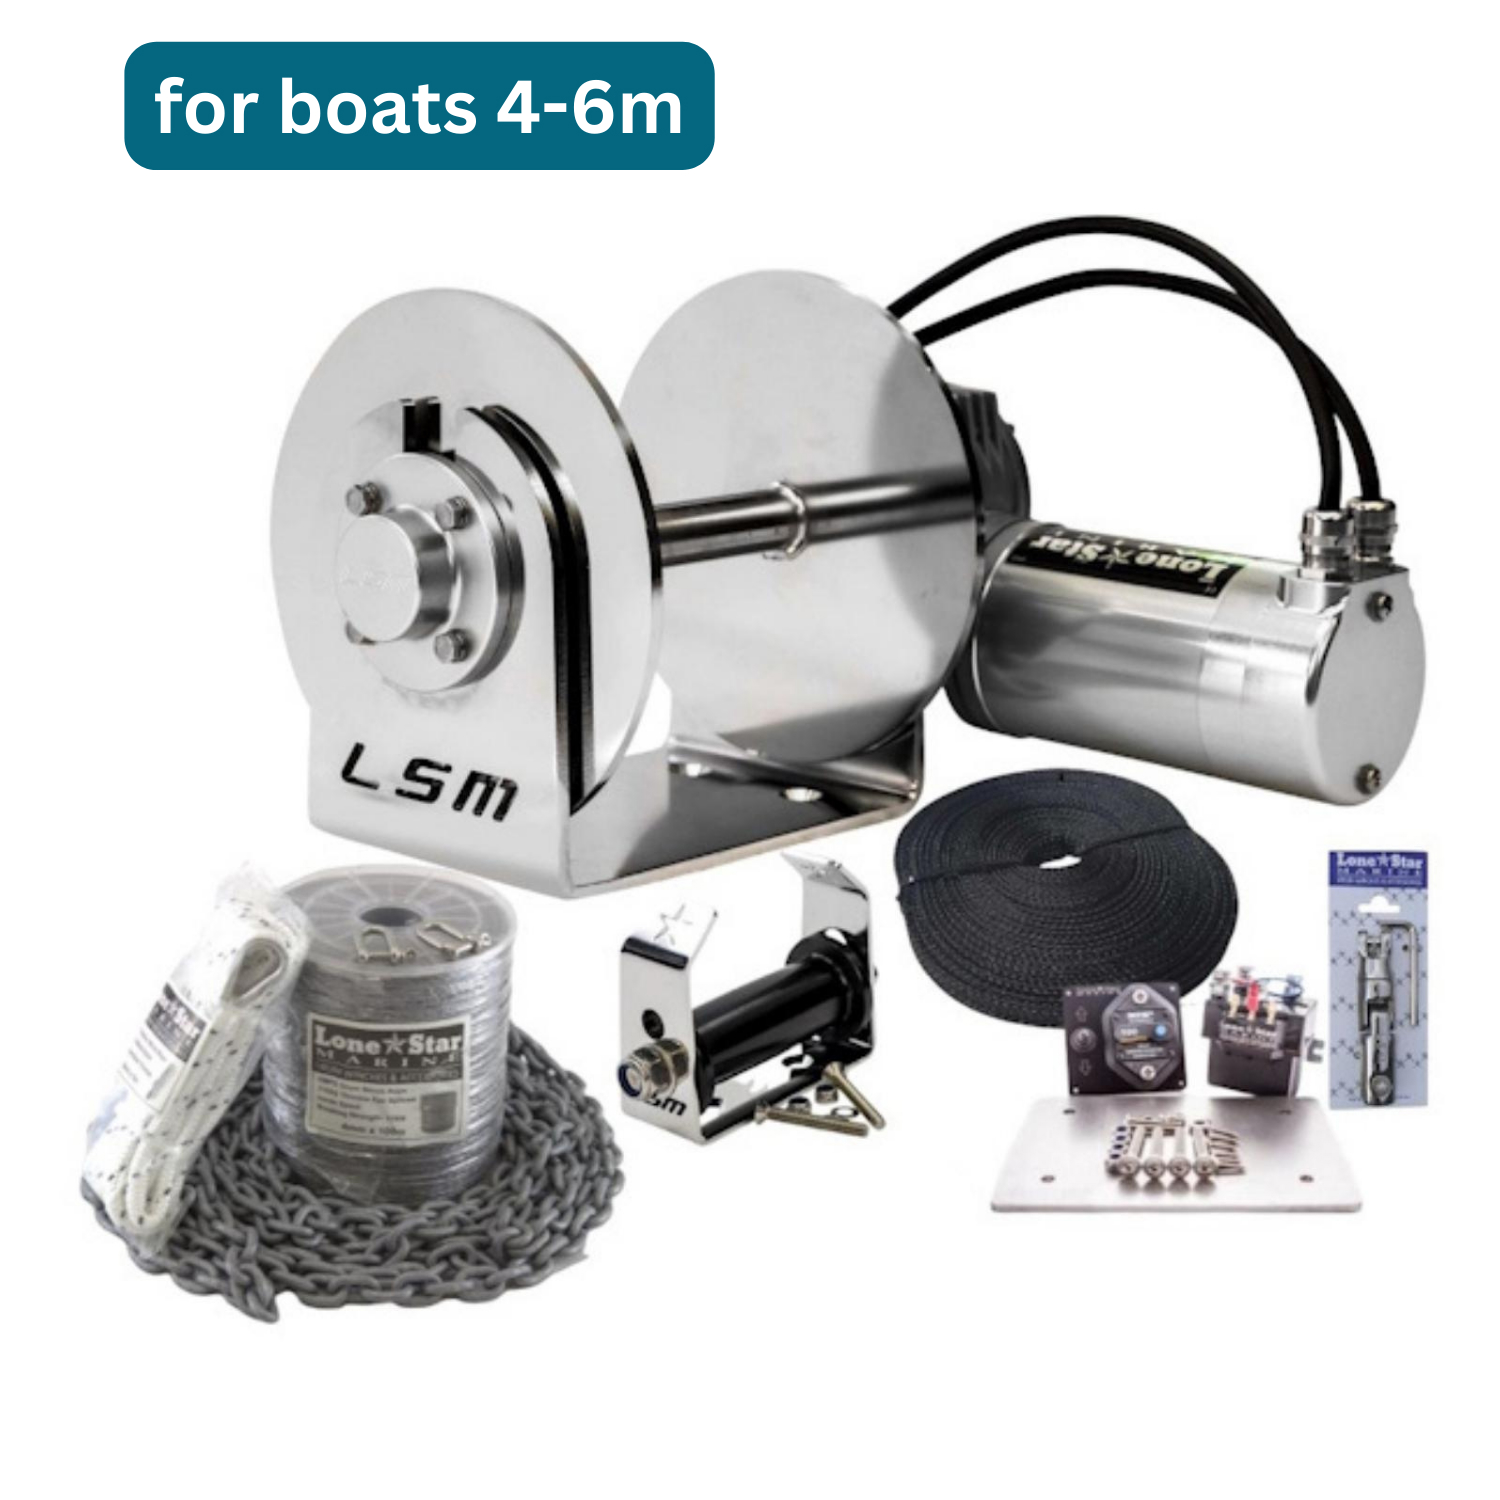 GX1 Anchor Winches for Boats 4-6m